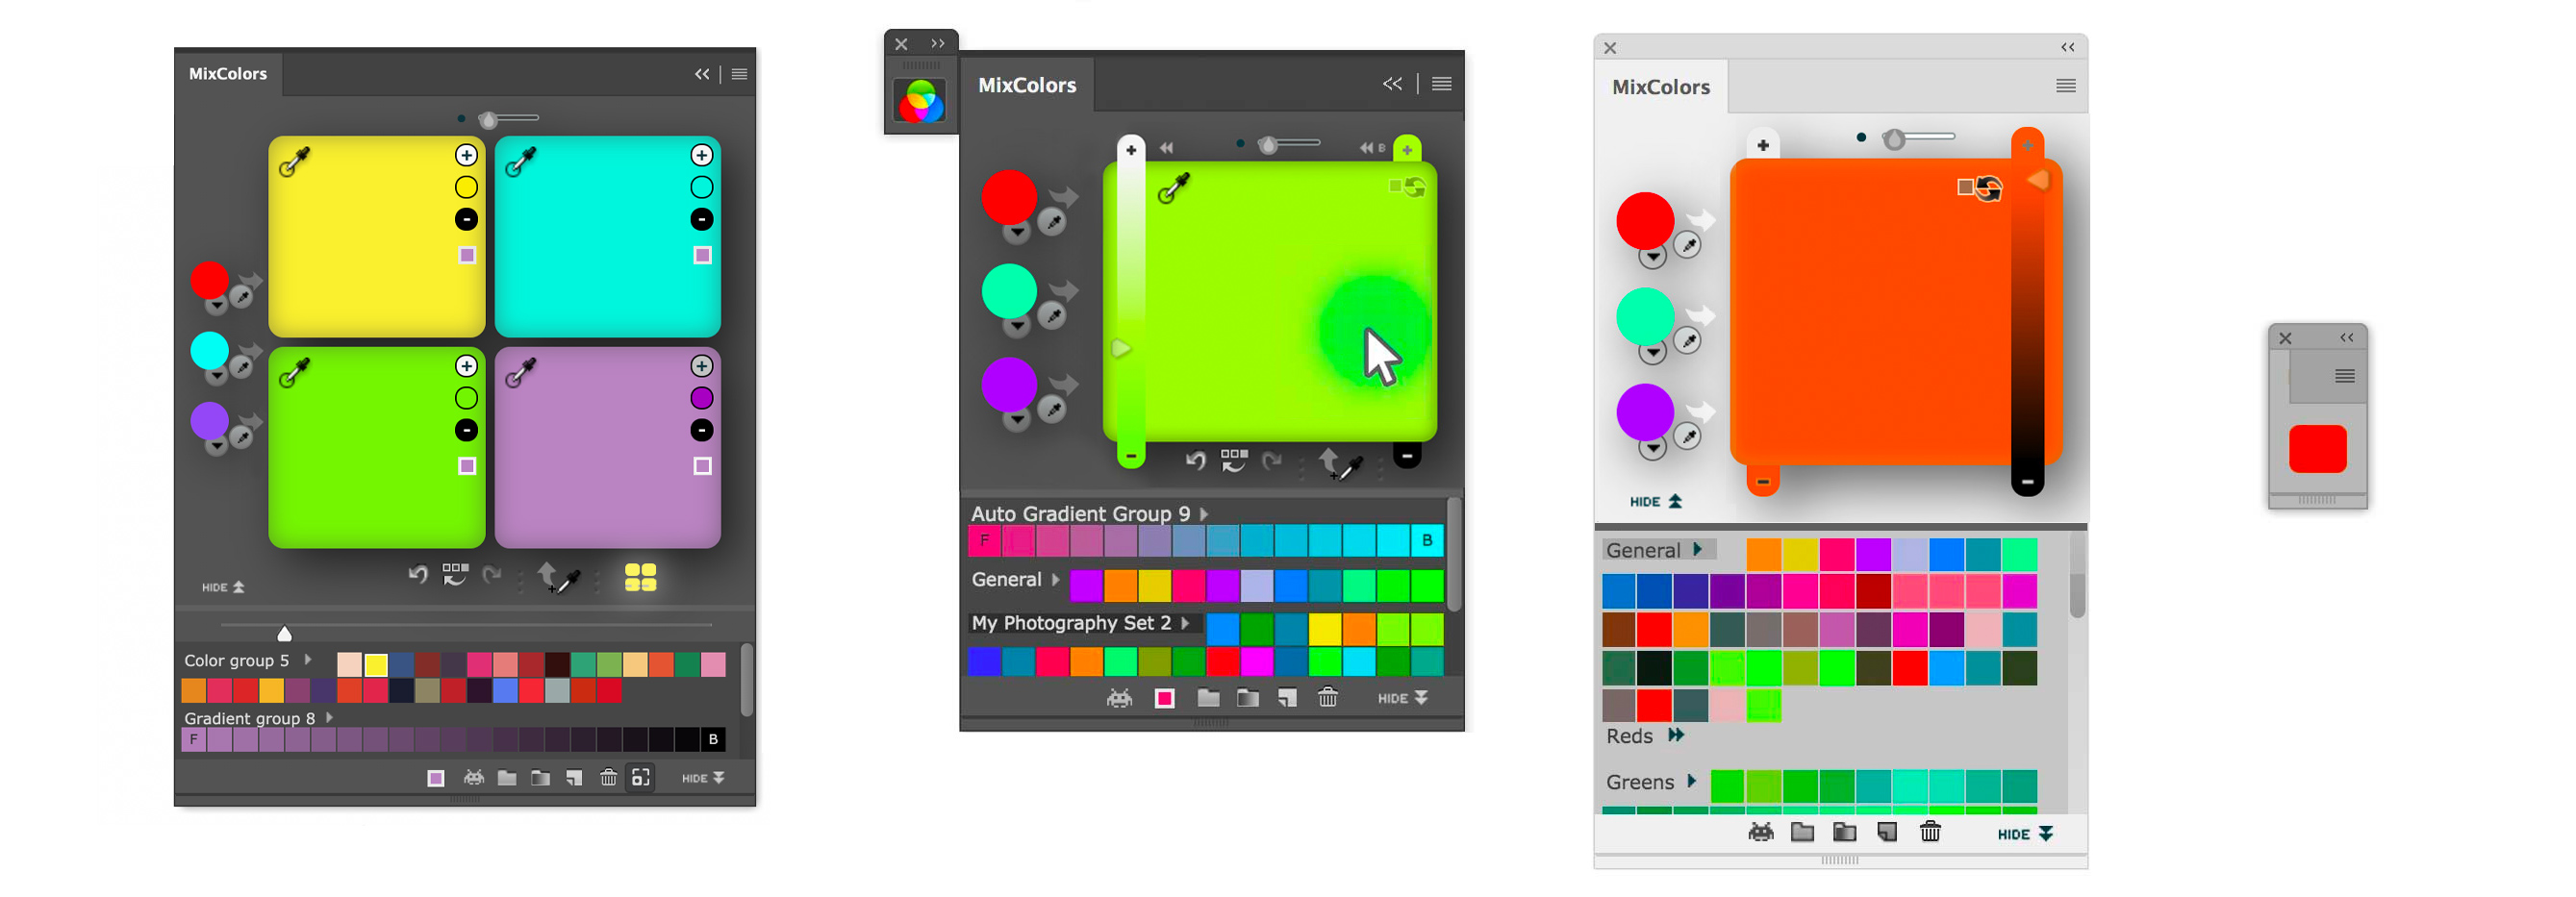 MixColors 4 Color Mixer Modes and Swatch Groups